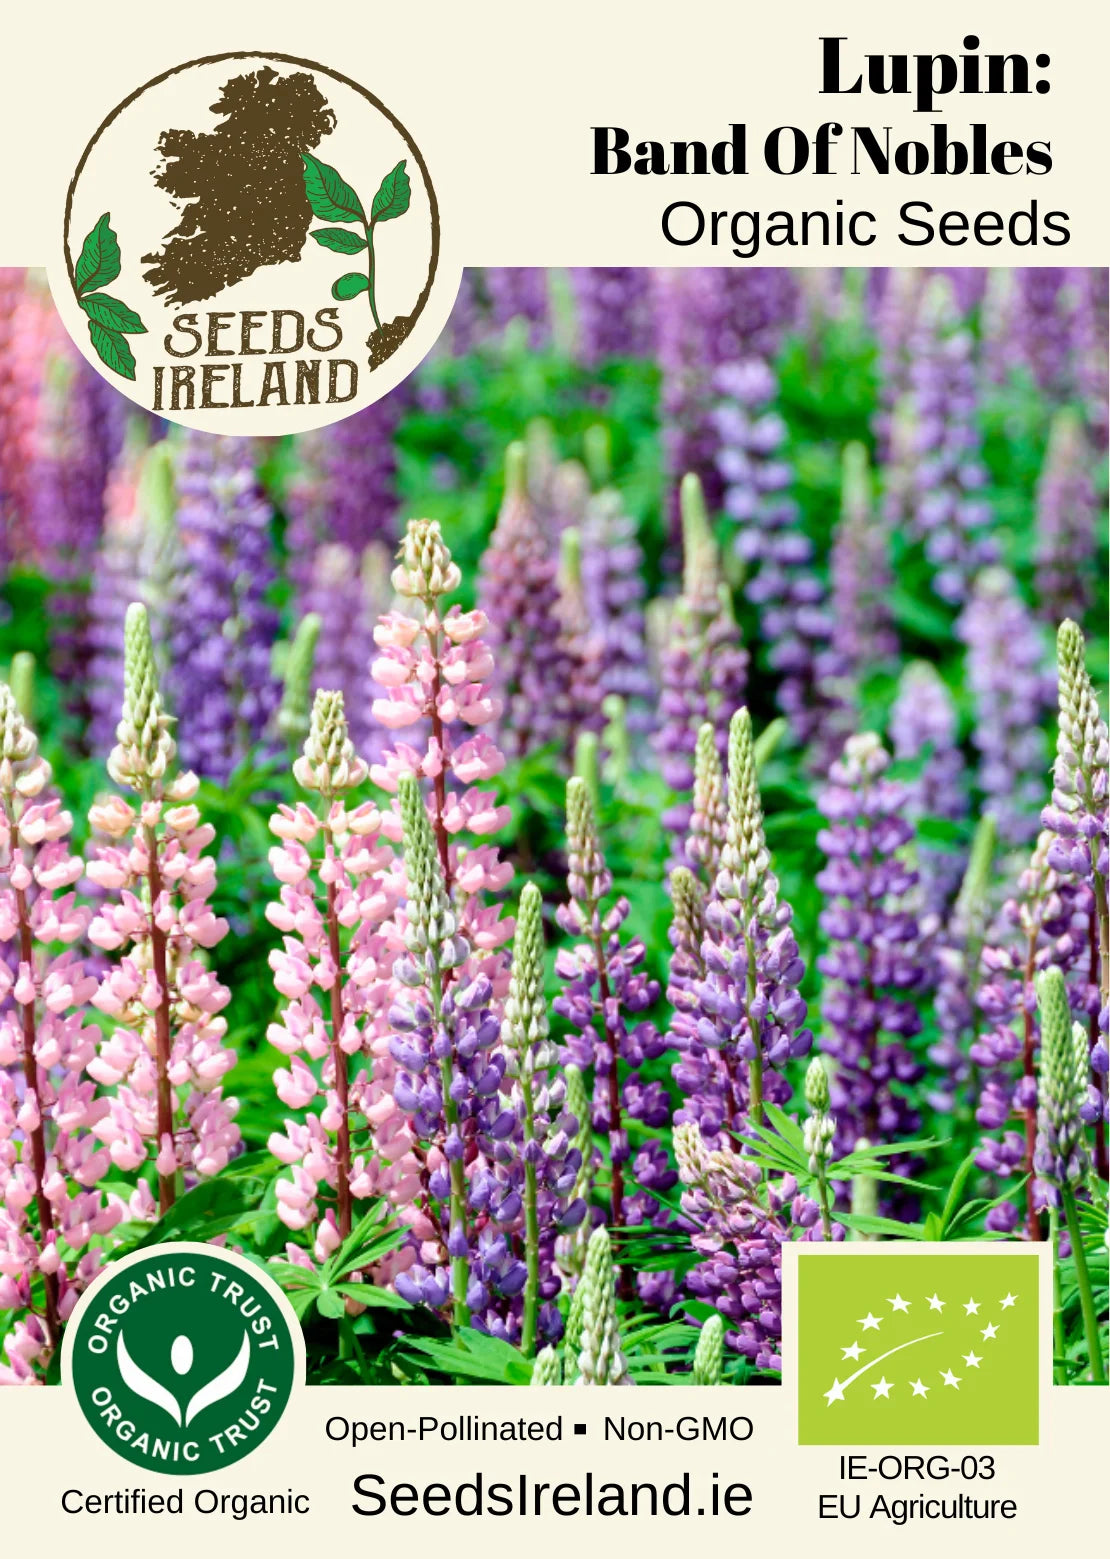 Lupin: Band Of Nobles Organic Seed